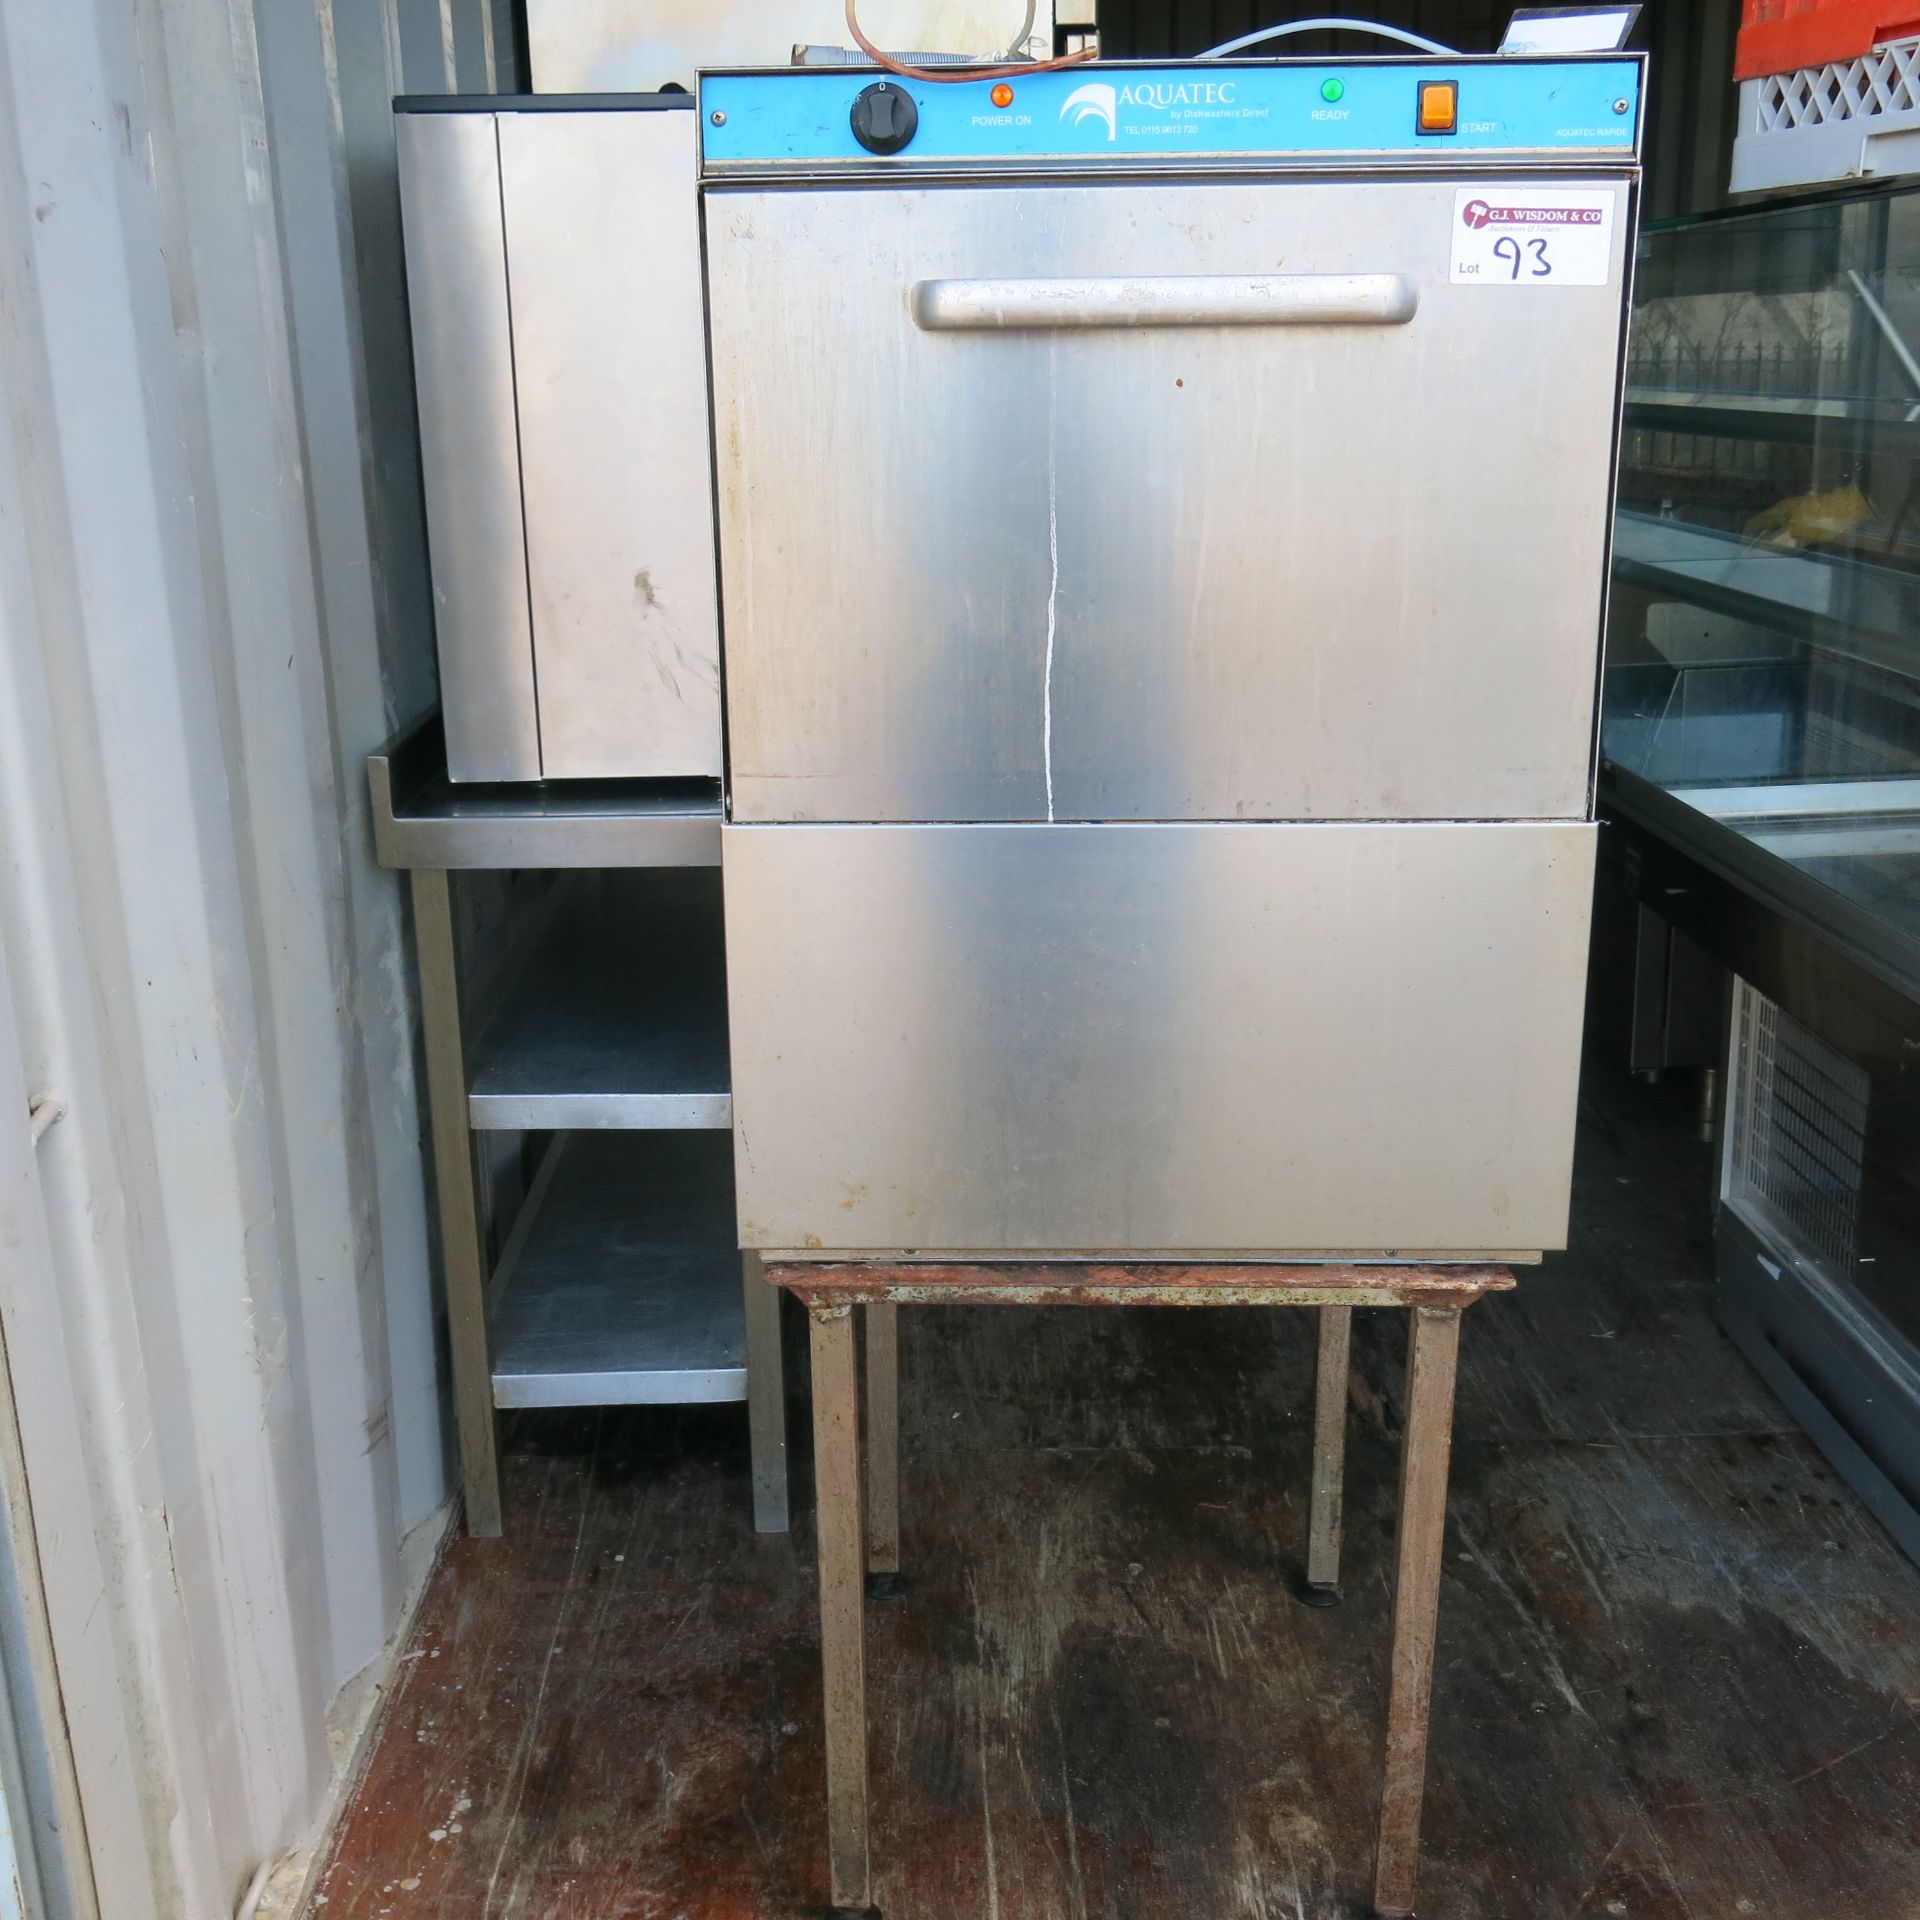 Aquatec Rapide Stainless Steel Front Load Dishwasher, Model Aquatec 30BBTDDUK with 5 Trays. Size ( - Image 7 of 7